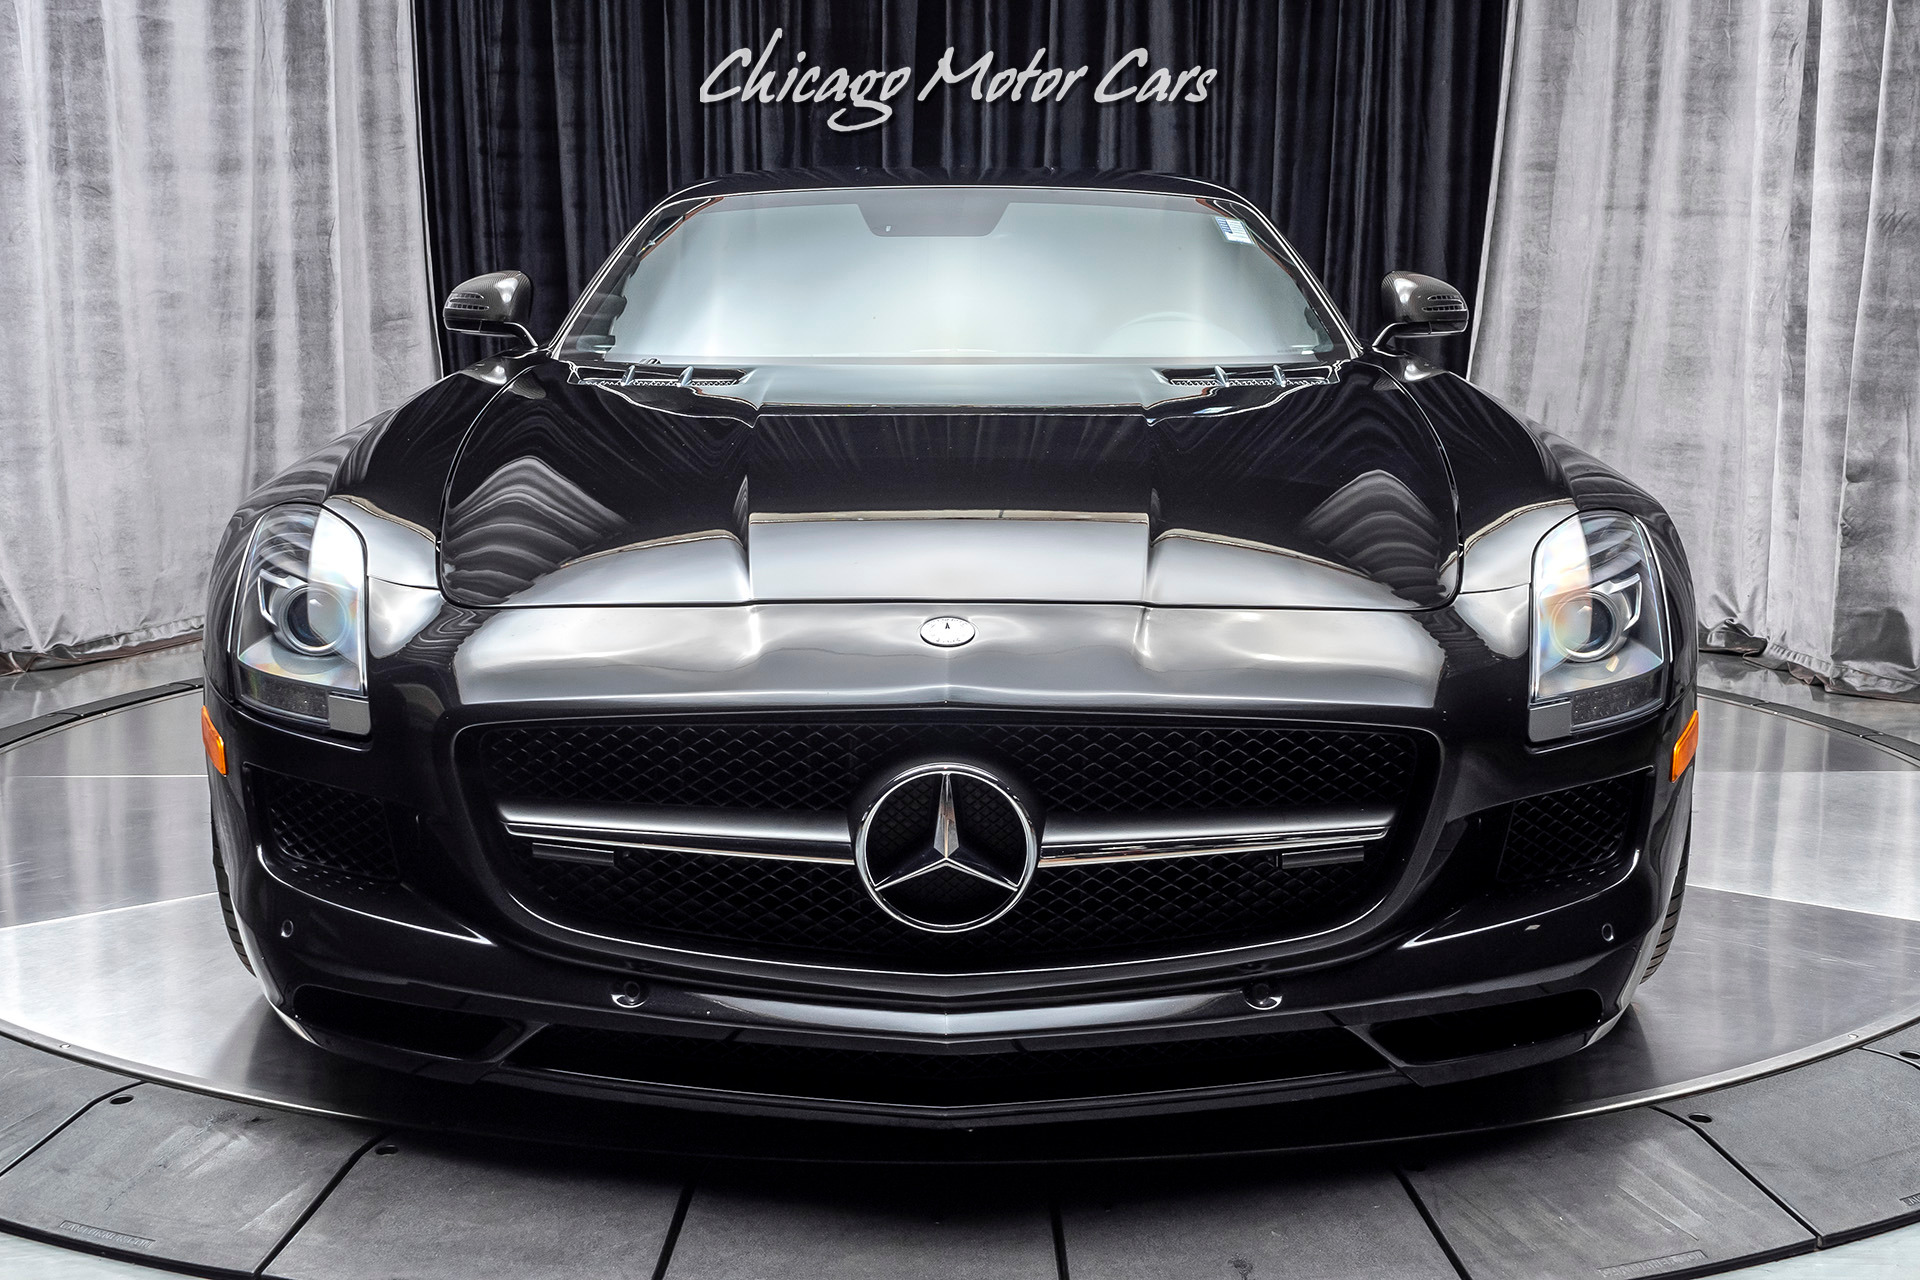 Used-2011-Mercedes-Benz-SLS-AMG-Gullwing-Coupe-MSRP-220k-Kleemann-Supercharged-Carbon-Fiber-LOADED